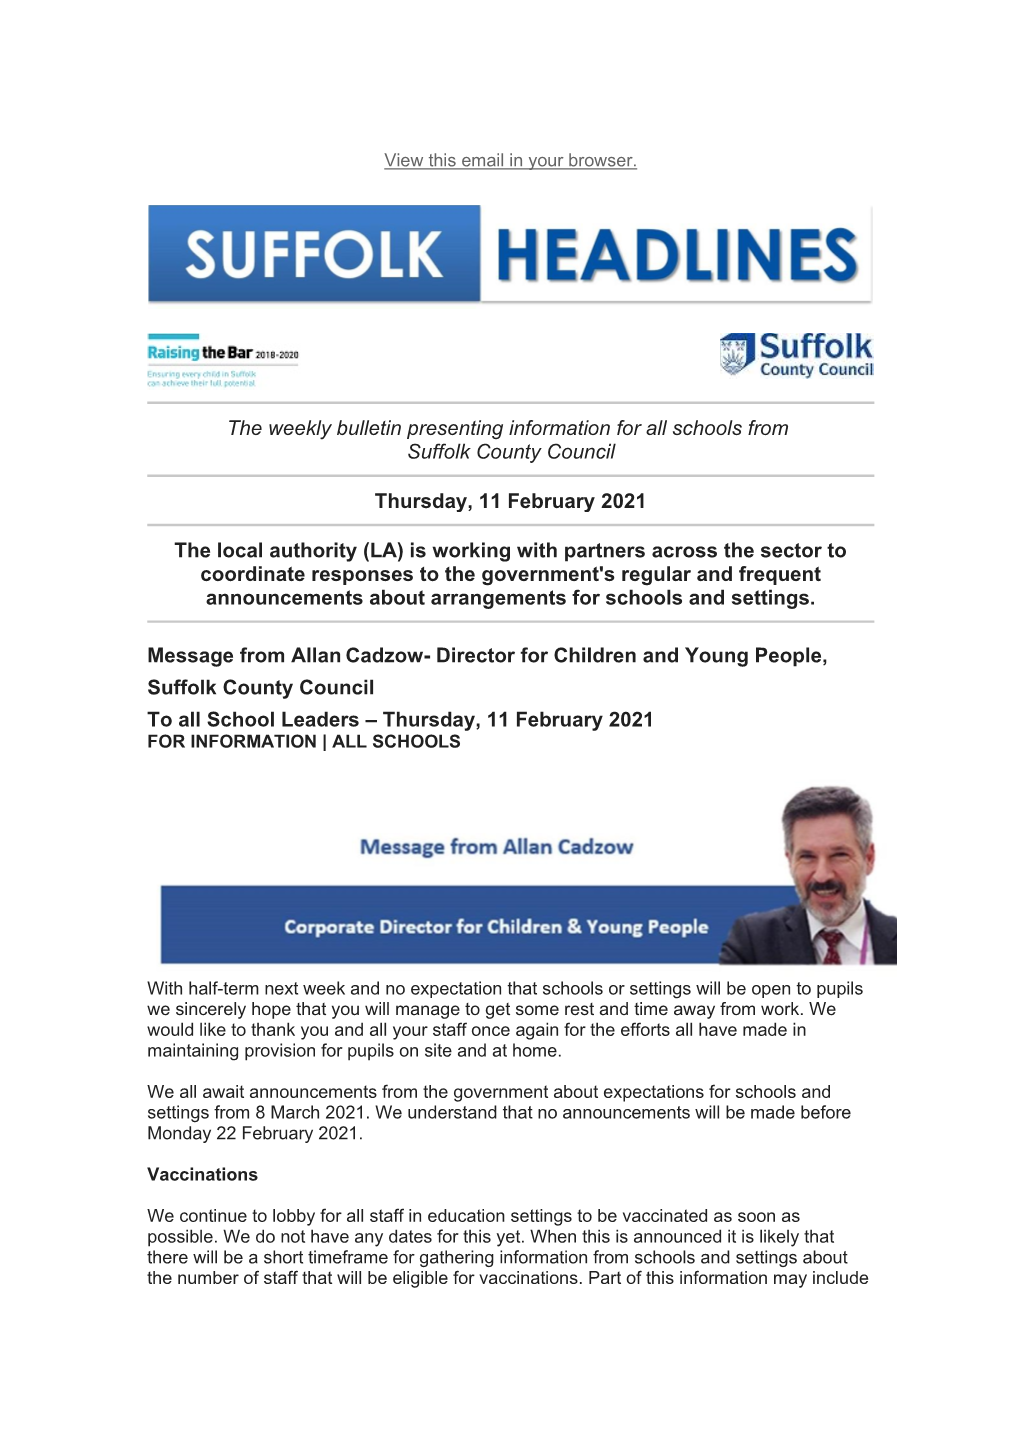 The Weekly Bulletin Presenting Information for All Schools from Suffolk County Council